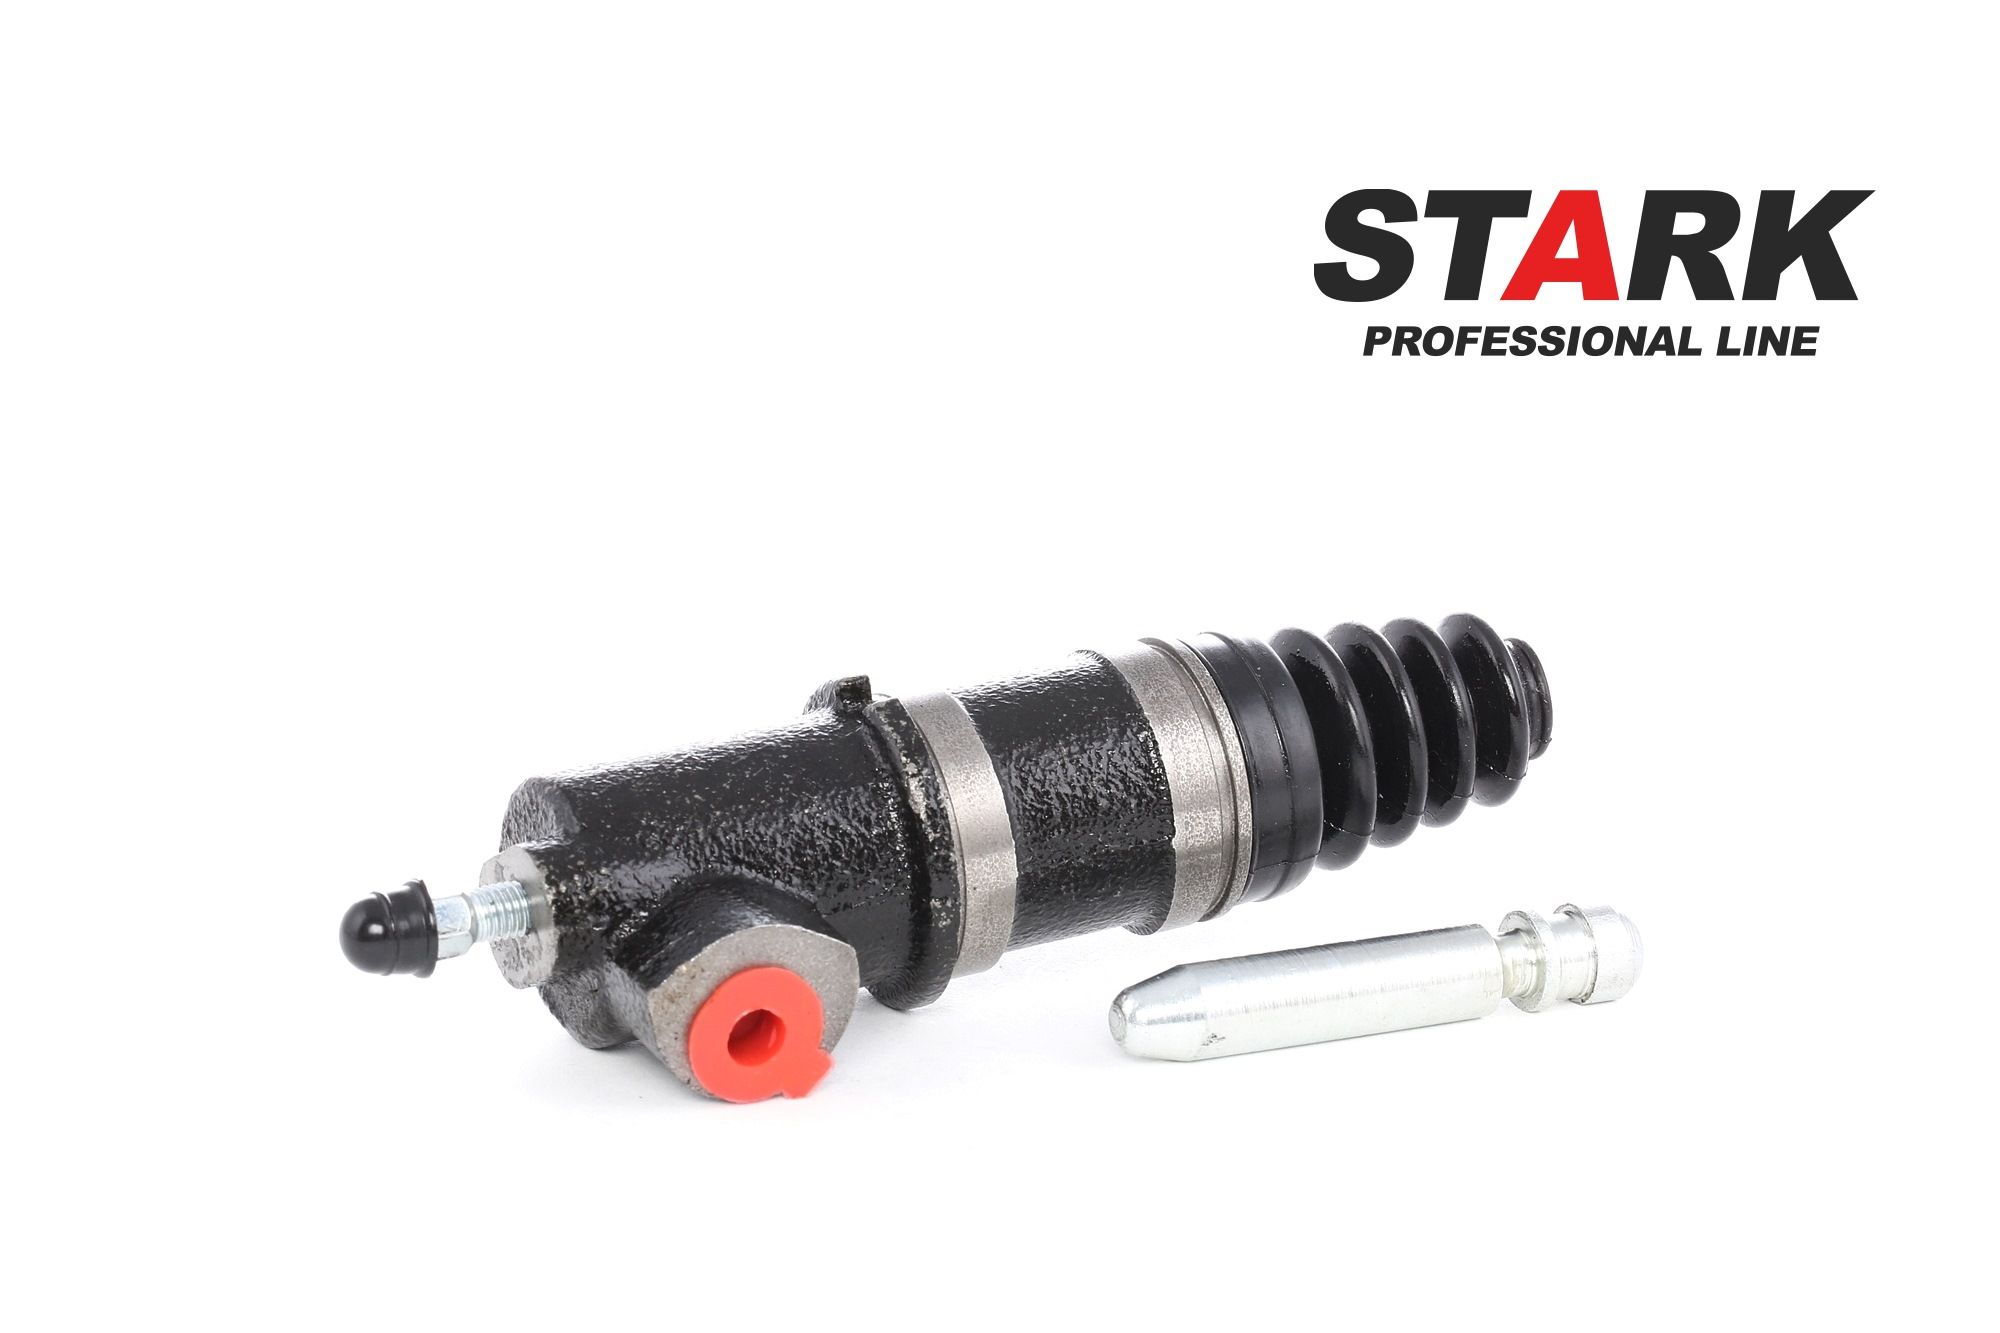 Original SKSC-0620060 STARK Slave cylinder experience and price